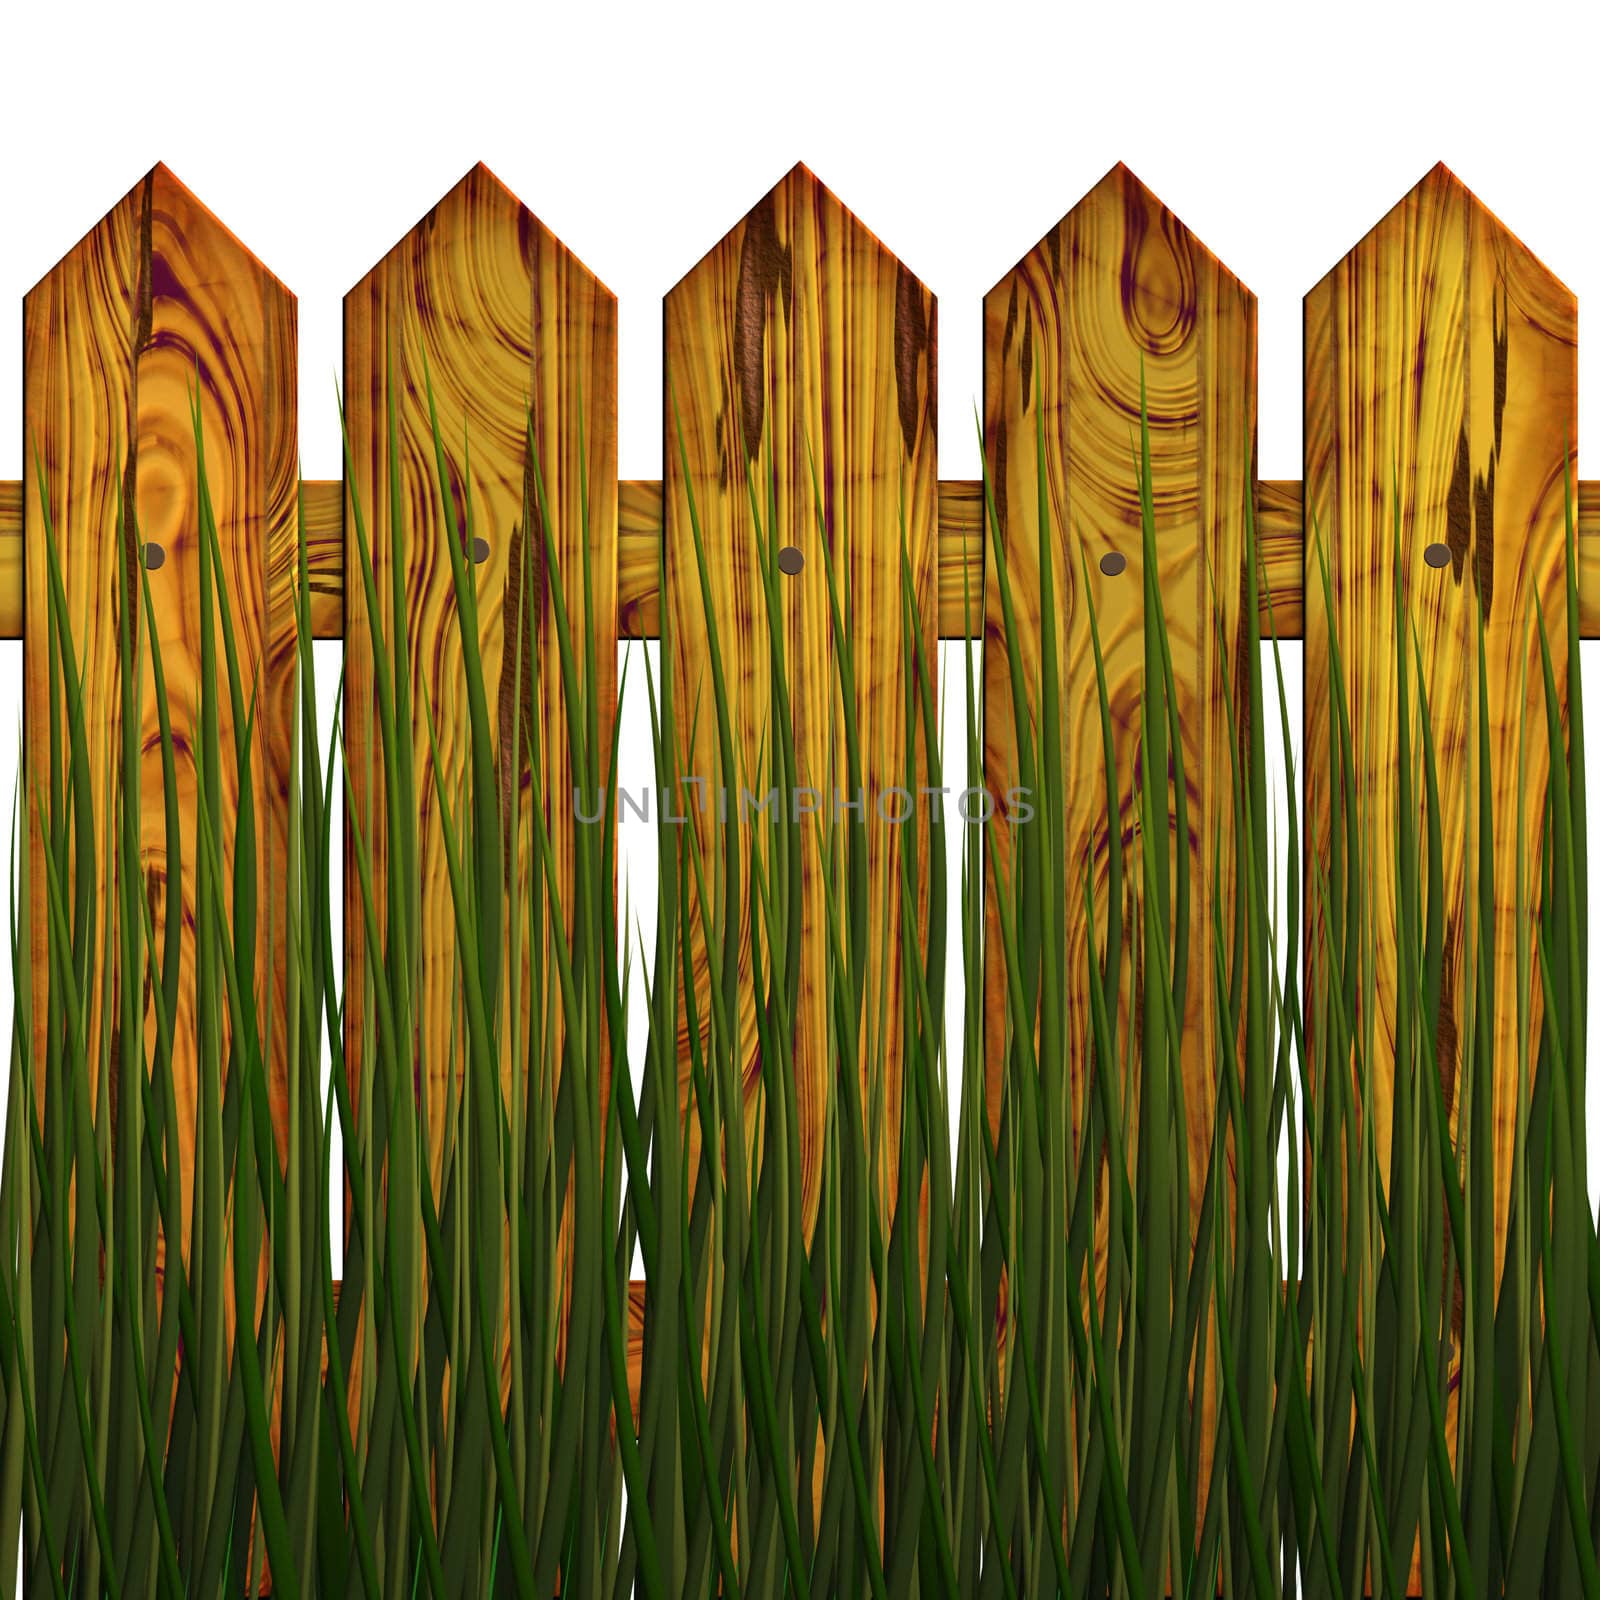 The fence in herb, on white background, The Illustration 3D. isolated object